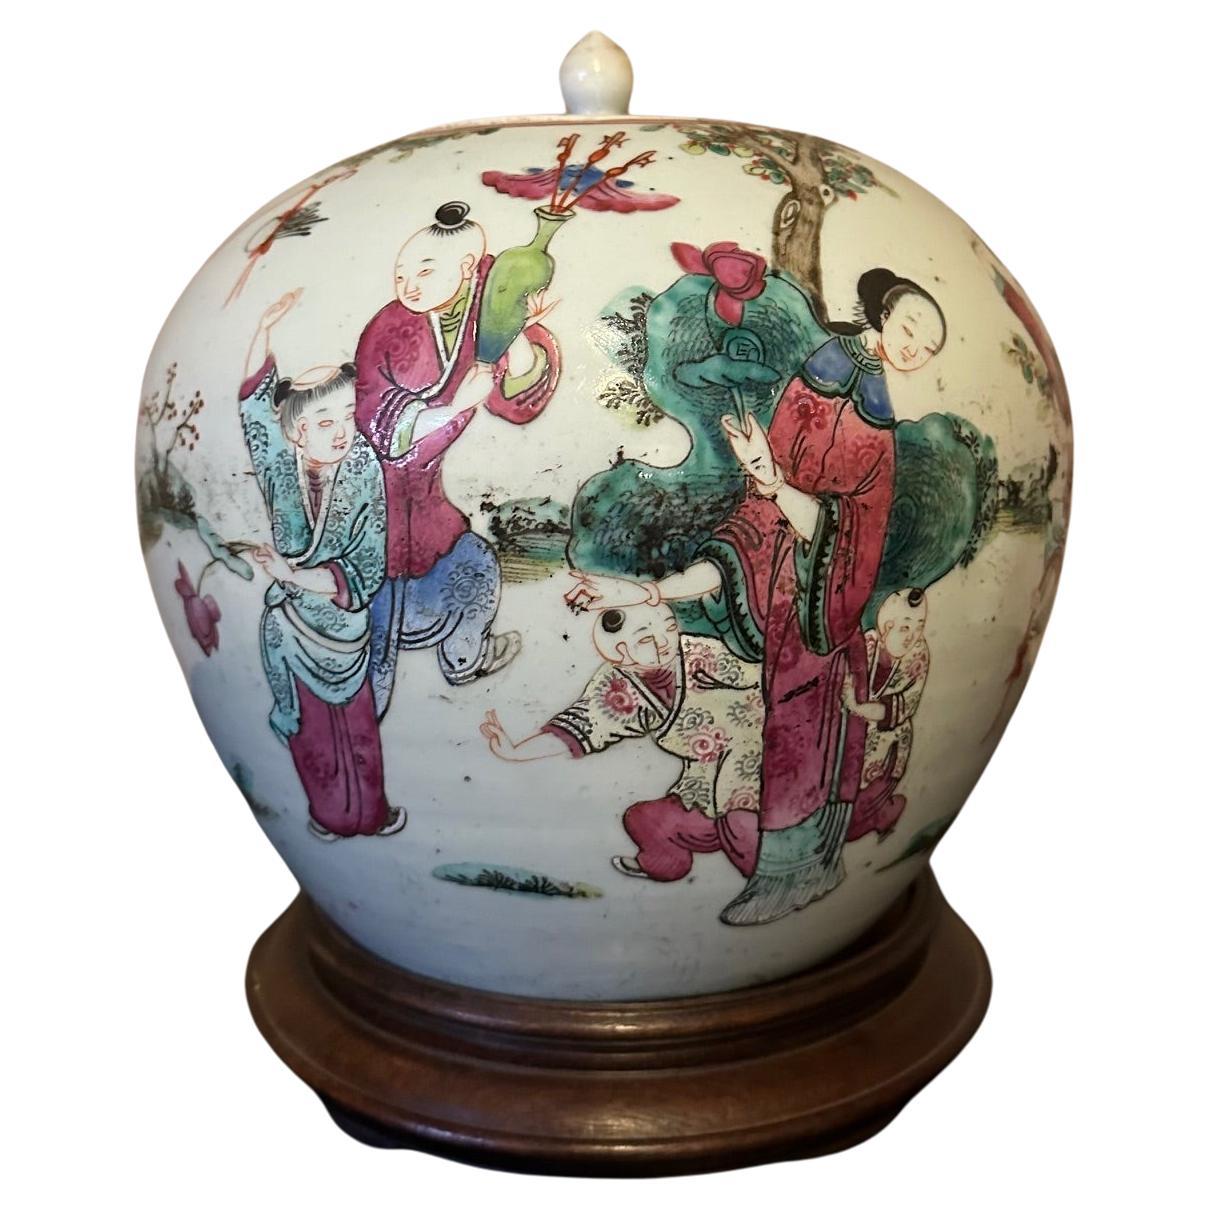 Early 20th century Chinese Porcelain Ginger Jar, 1900s